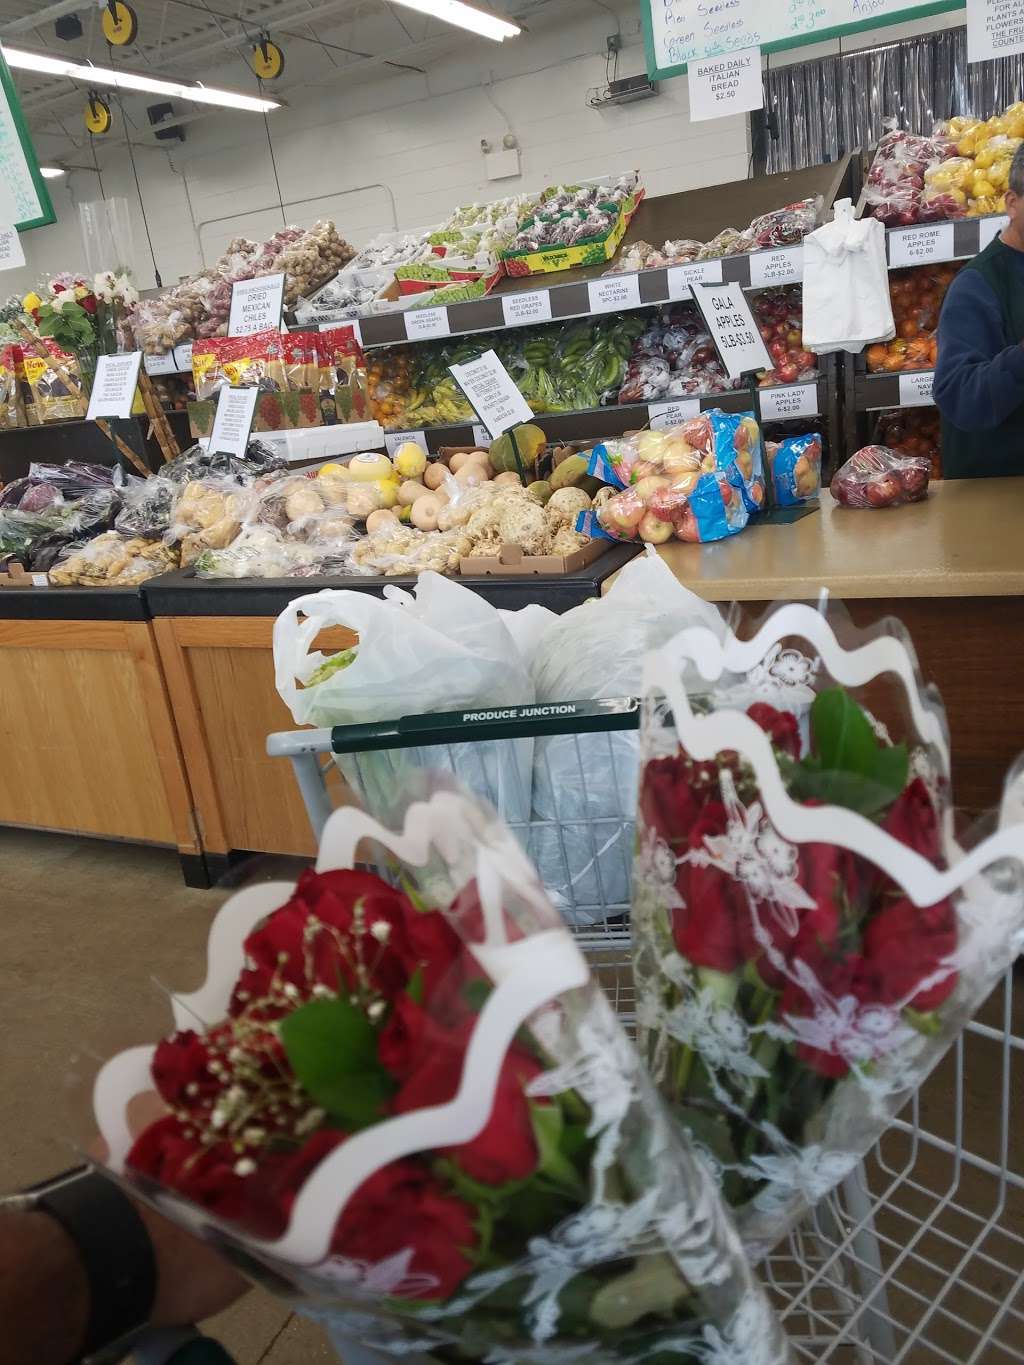 Produce Junction | 14 Willow Rd, Maple Shade Township, NJ 08052 | Phone: (856) 727-0806